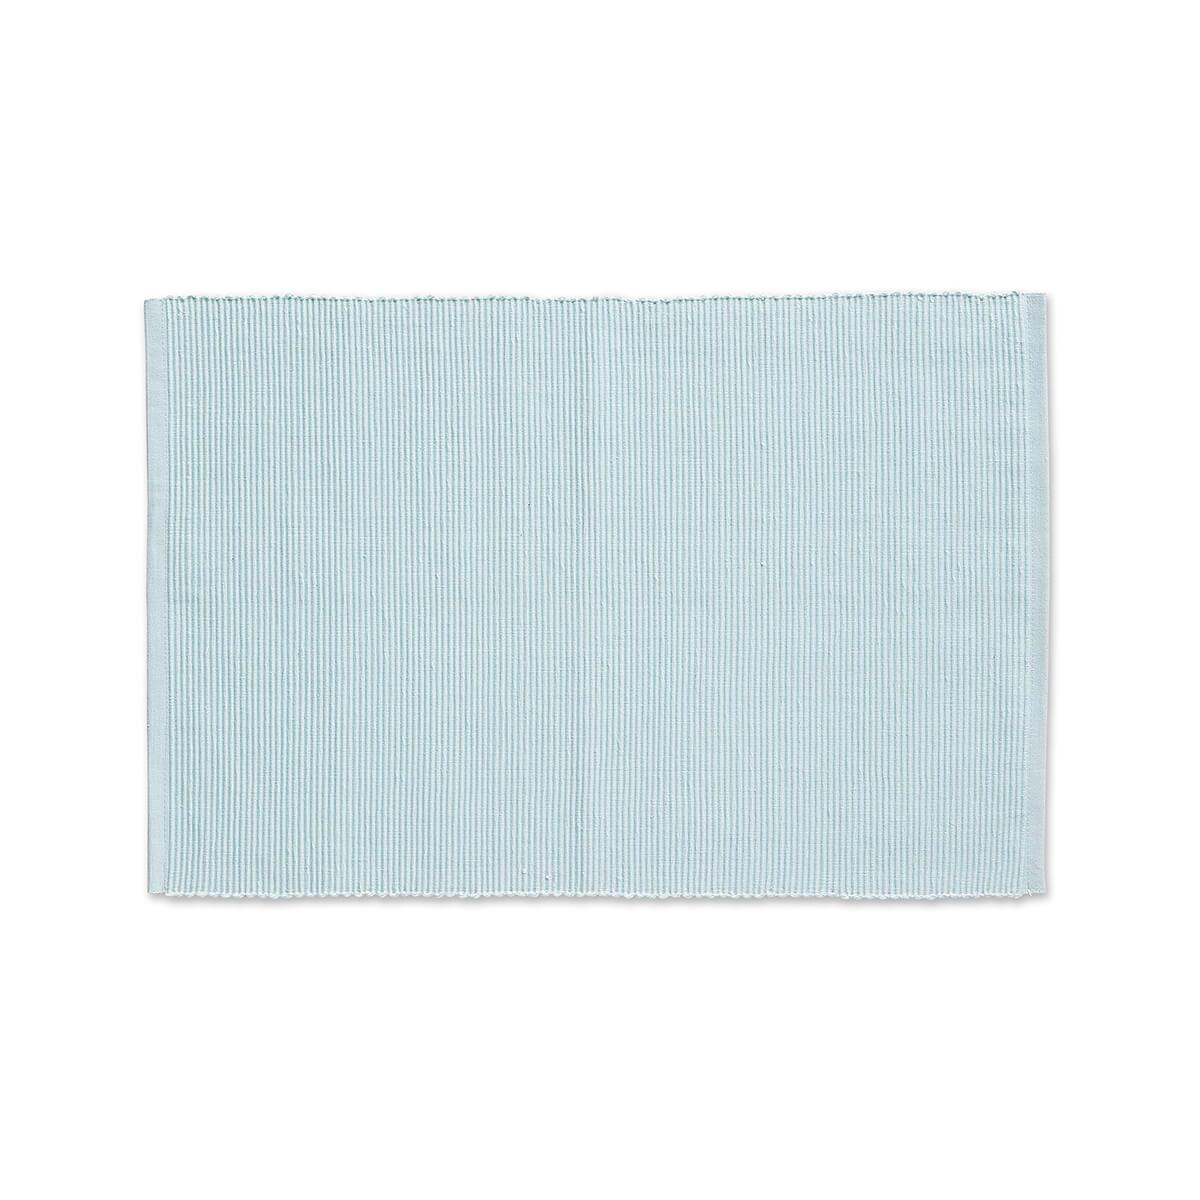  Robins Egg Blue Placemat